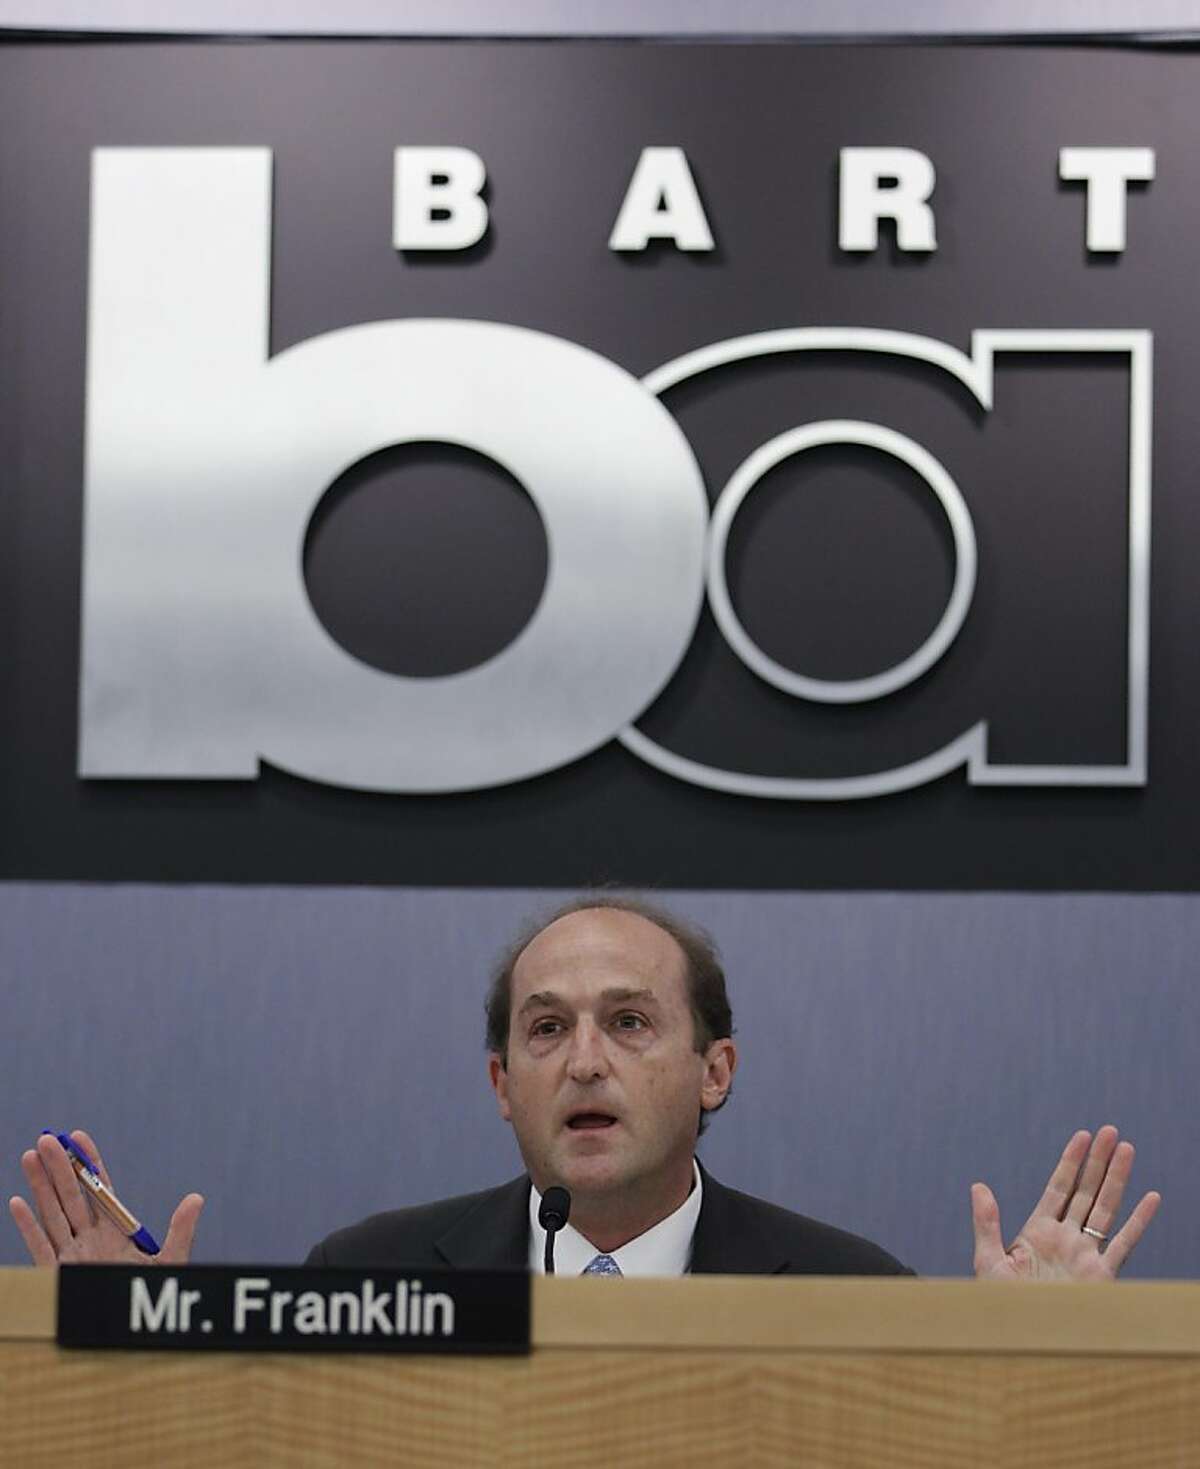 Bay Area Rapid Transit (BART) agency board president Bob Franklin gestures during a public meeting at BART headquarters in Oakland, Calif., Wednesday, Aug. 24, 2011 to help ease tensions over whether there should be a policy on cutting wireless access to its stations during protests. The discussion was whether it wants to continue using the tactic, which drew unfavorable comparisons to Hosni Mubarak's attempts to cut Internet access to most of Egypt to quell demonstrations protesting his regime. (AP Photo/Paul Sakuma)